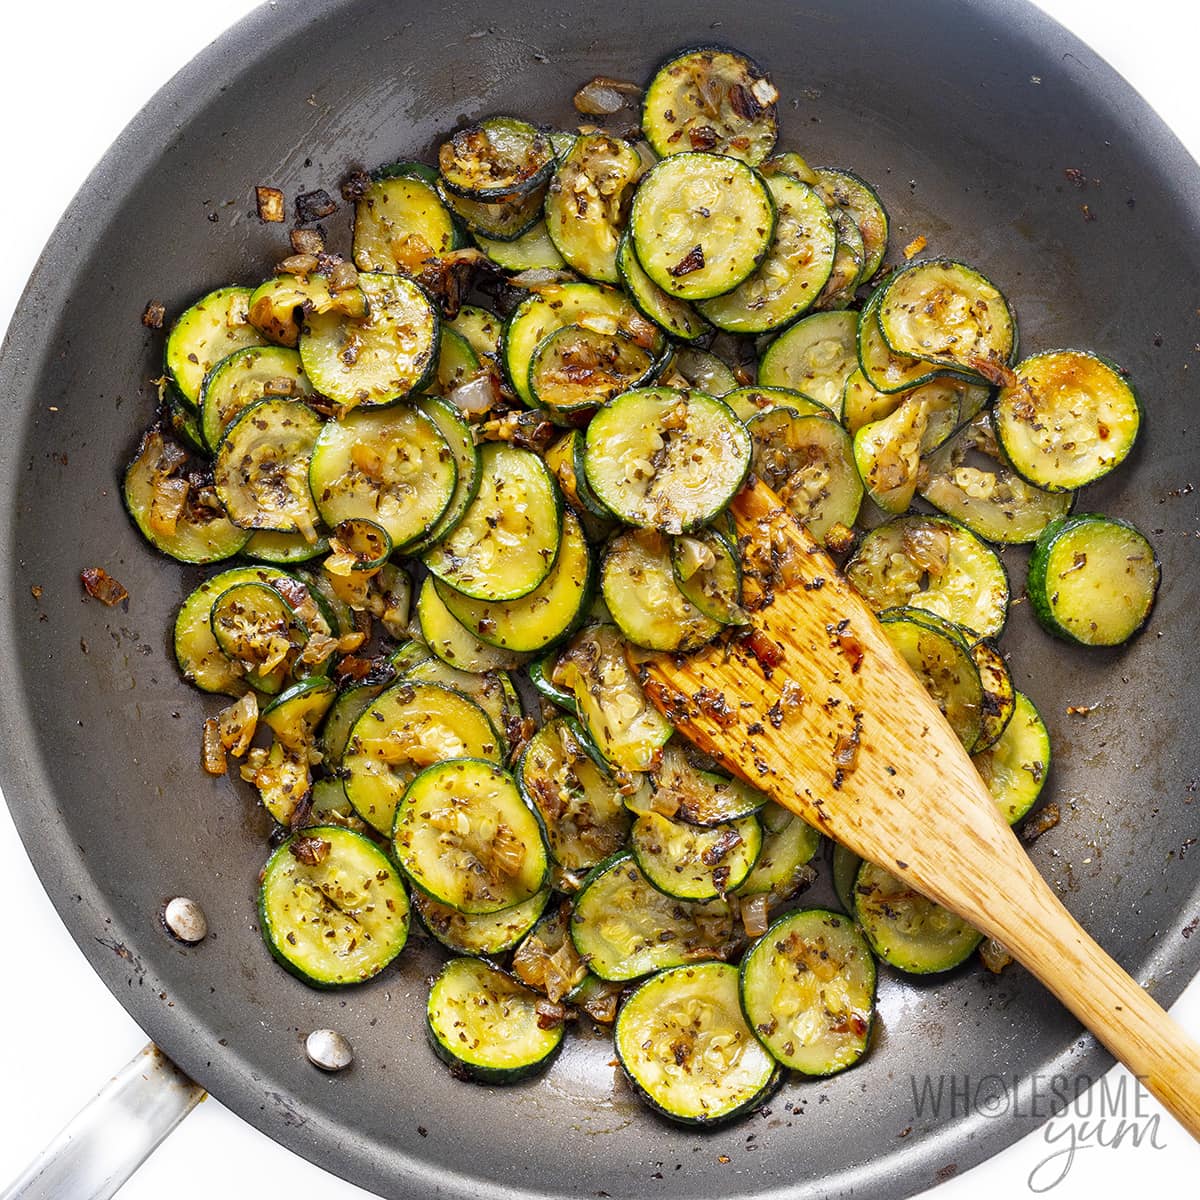 Onions cooking with sliced zucchini in a pan.